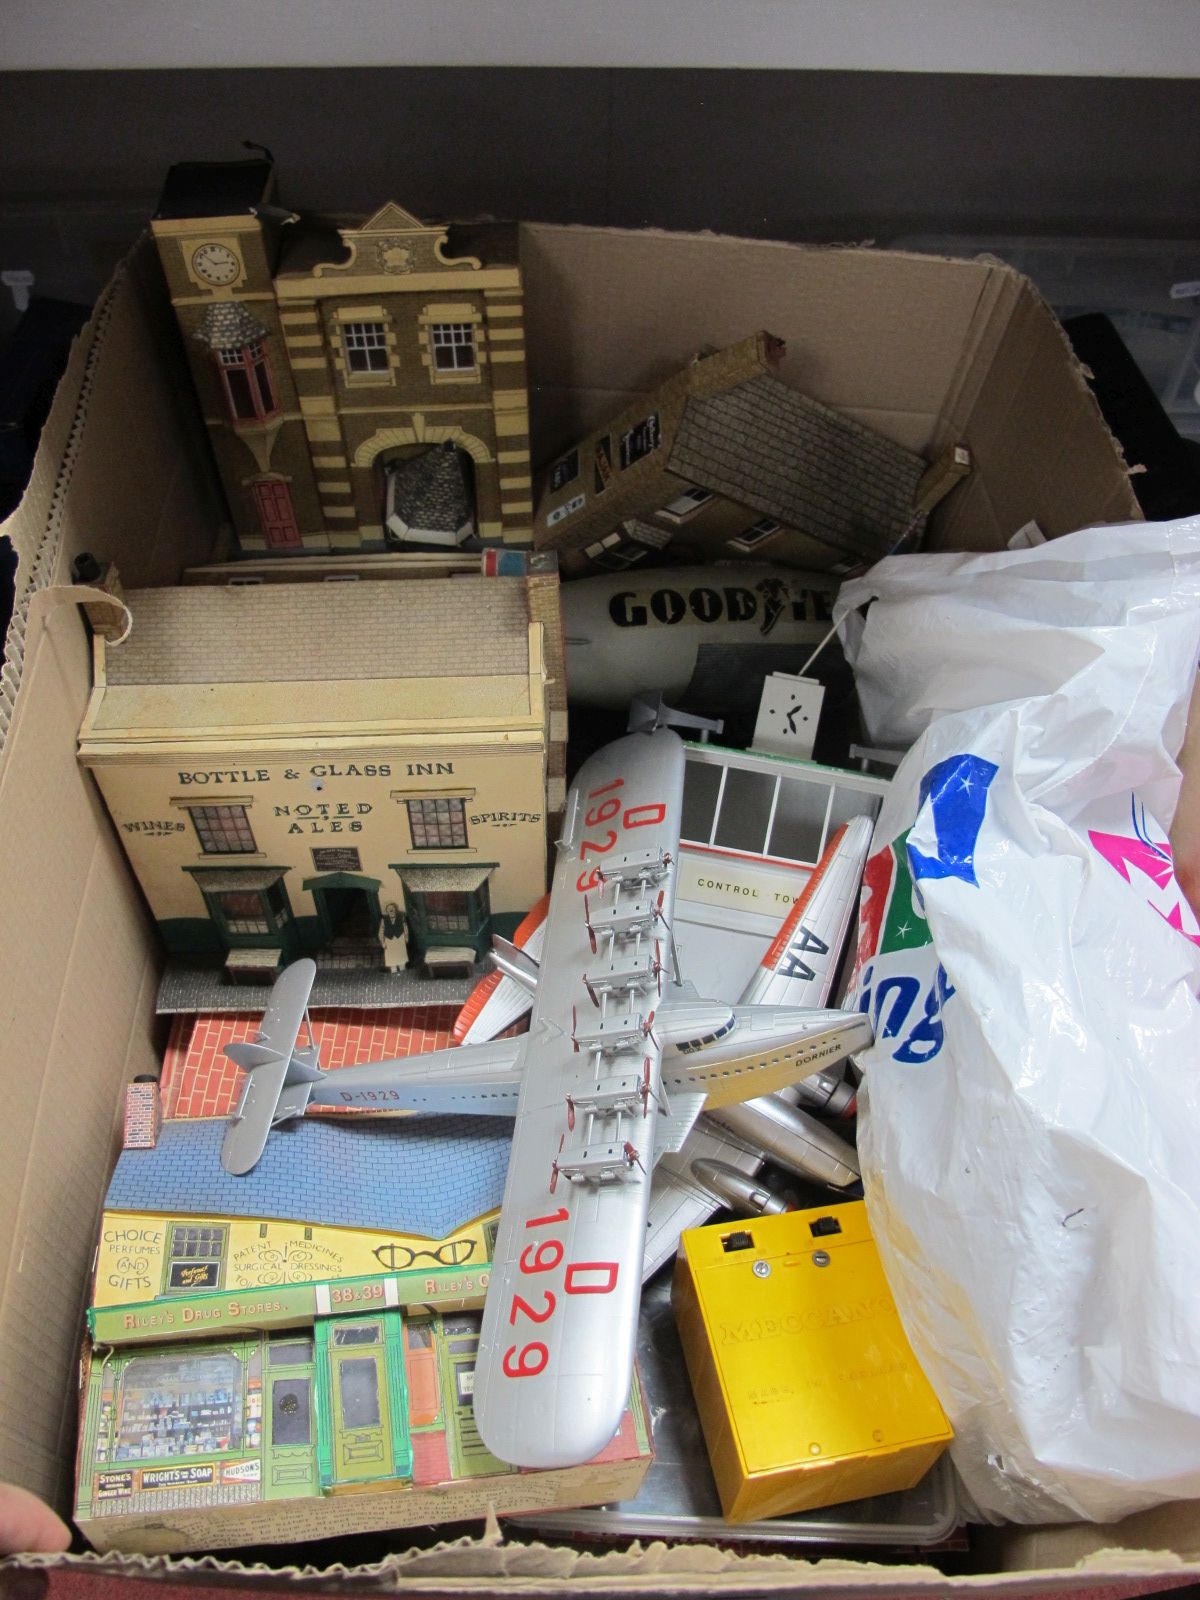 A Quantity of O/1 Gauge Cardboard Scenic Buildings, Plastic Aircraft, and associated items, all